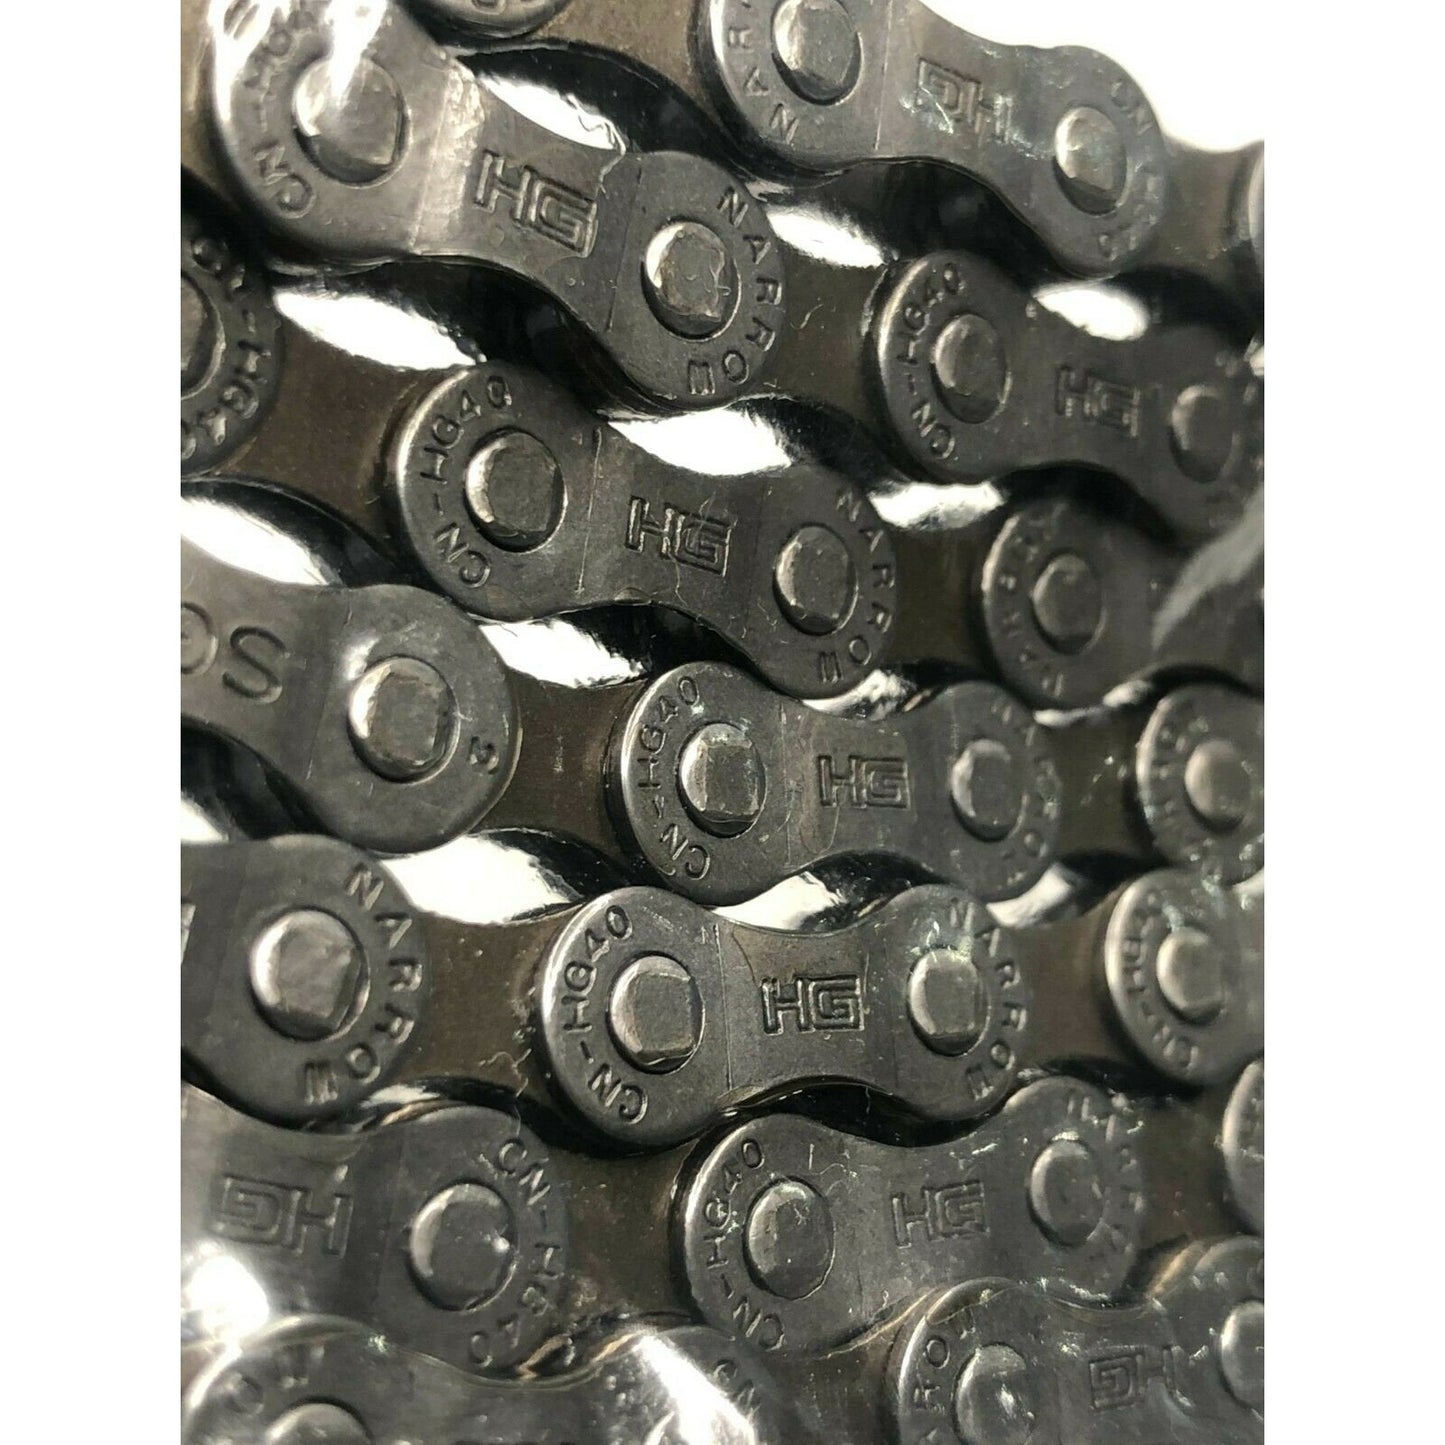 SHIMANO Cn-Hg40 Chain - 6/7/8 Speed Chains with Connecting Link AU STOCK